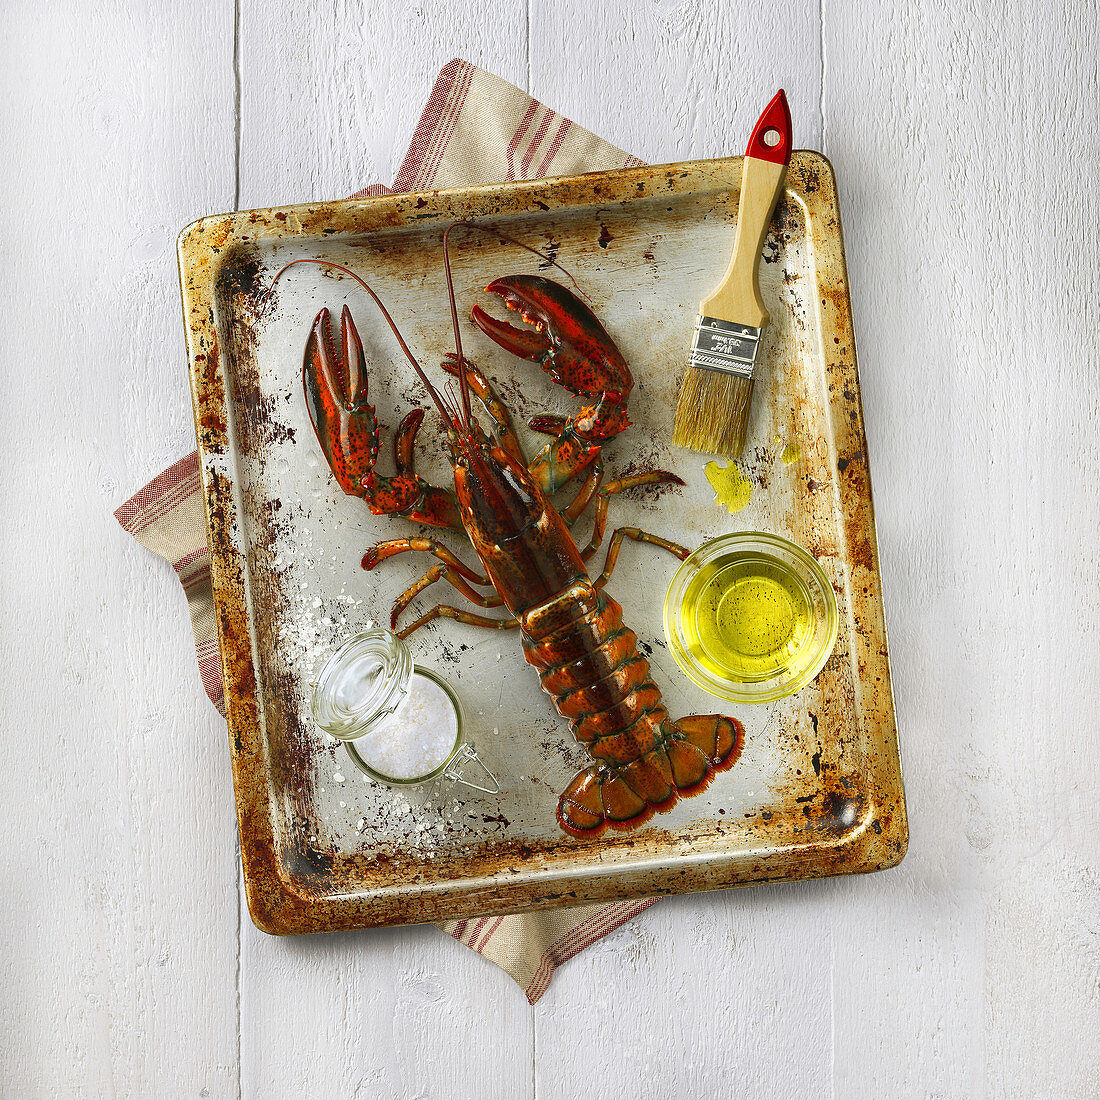 Lobster with salt and oil on an oven tray